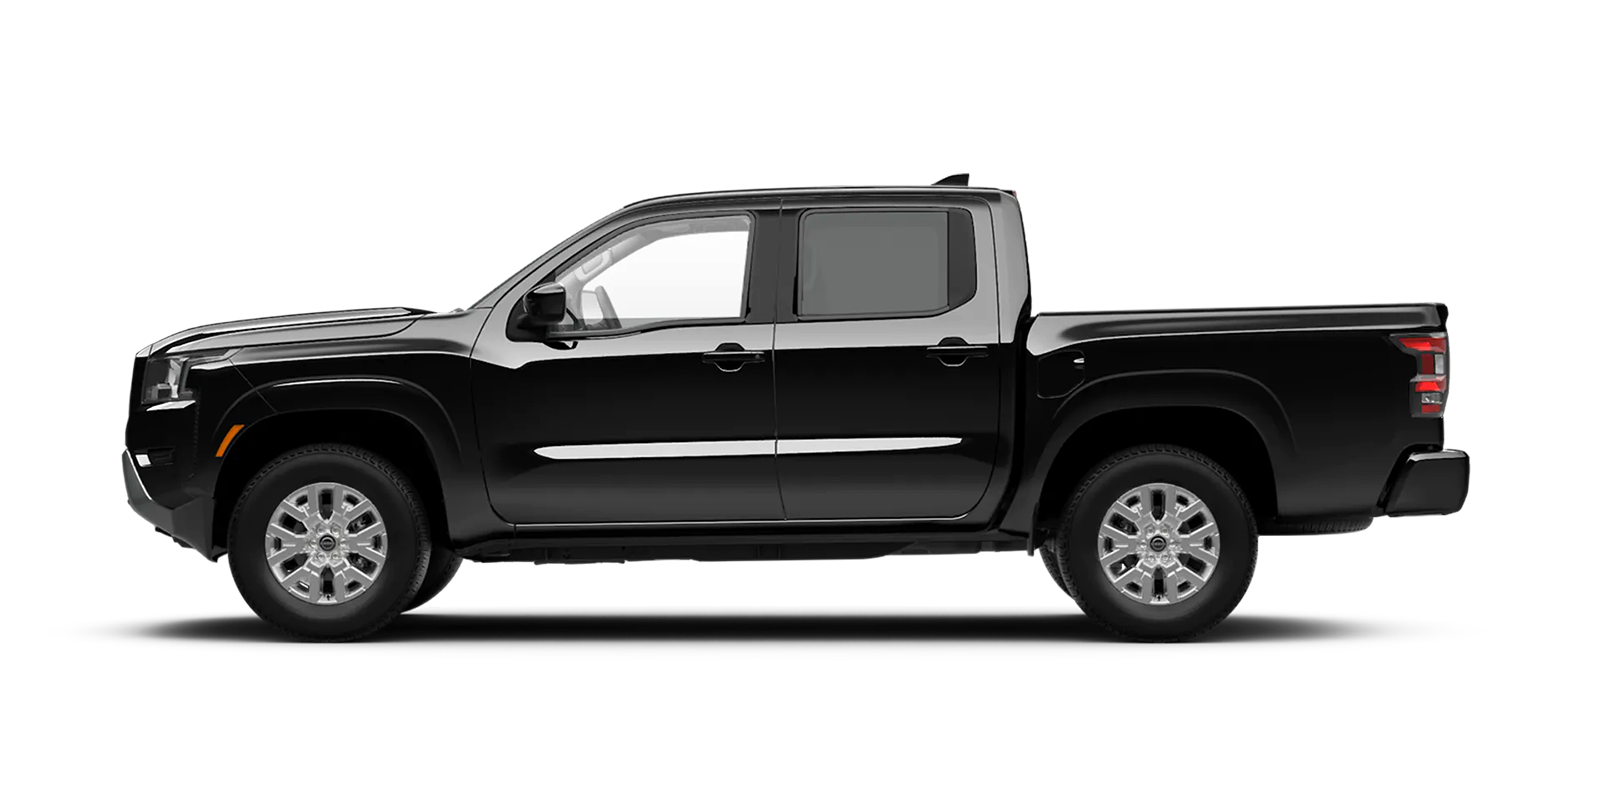 2022 Frontier Crew Cab SV 4x4 in Super Black | Courtesy Nissan PA in Altoona PA